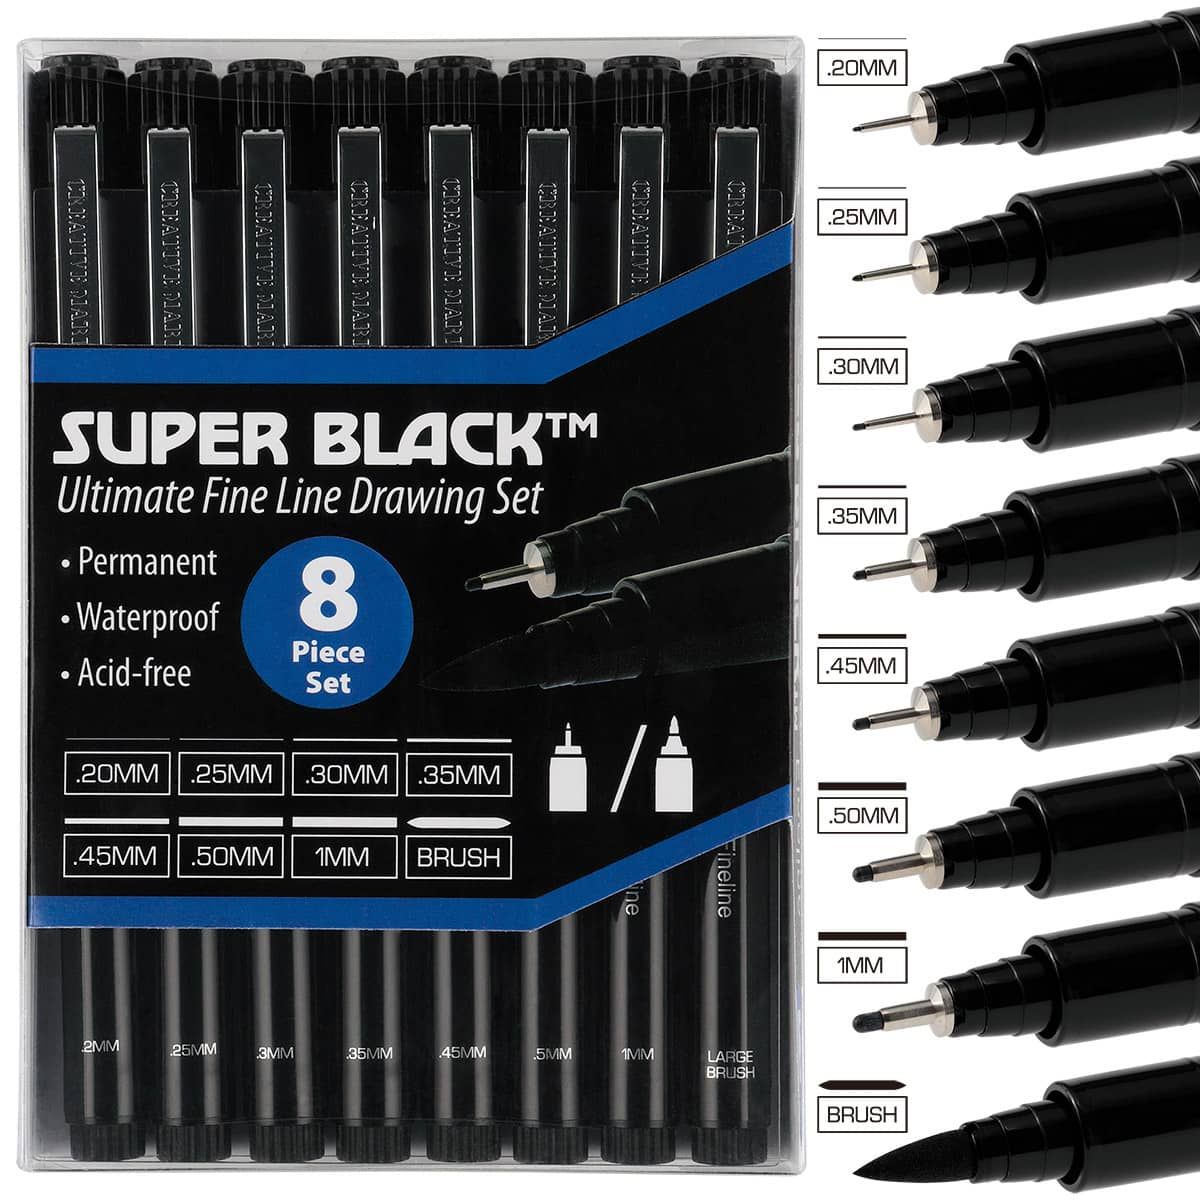 Super Black Permanent Fineliners Ultimate Line Drawing Set of 8 - Creative Mark 